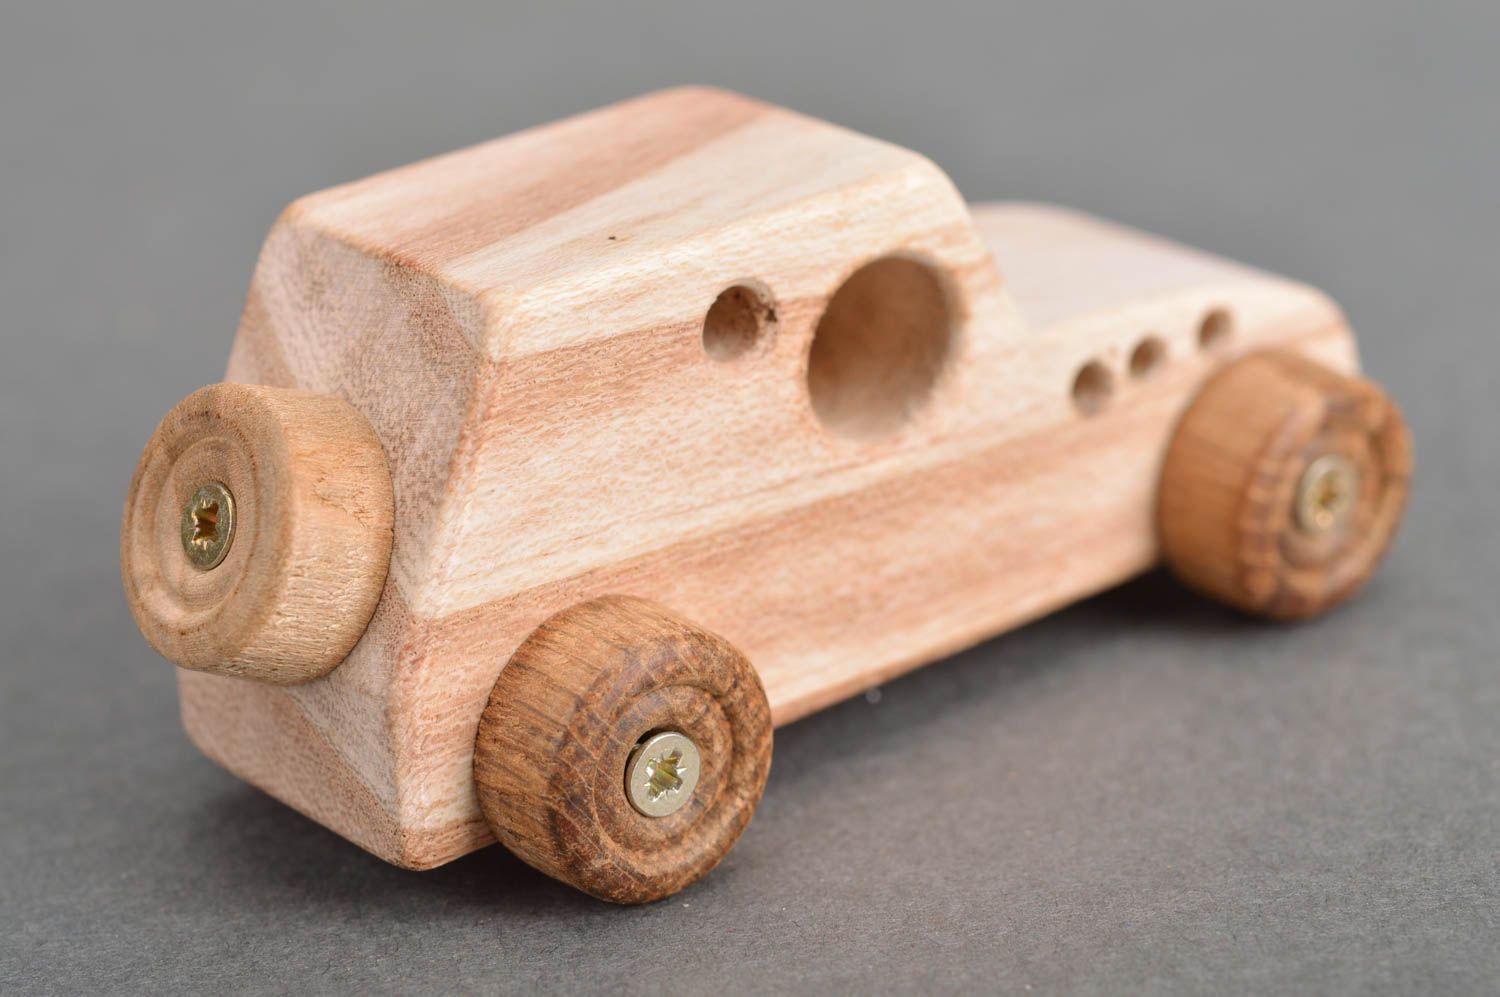 10 GORGEOUS WOODEN HANDMADE TOYS FOR TODDLERS